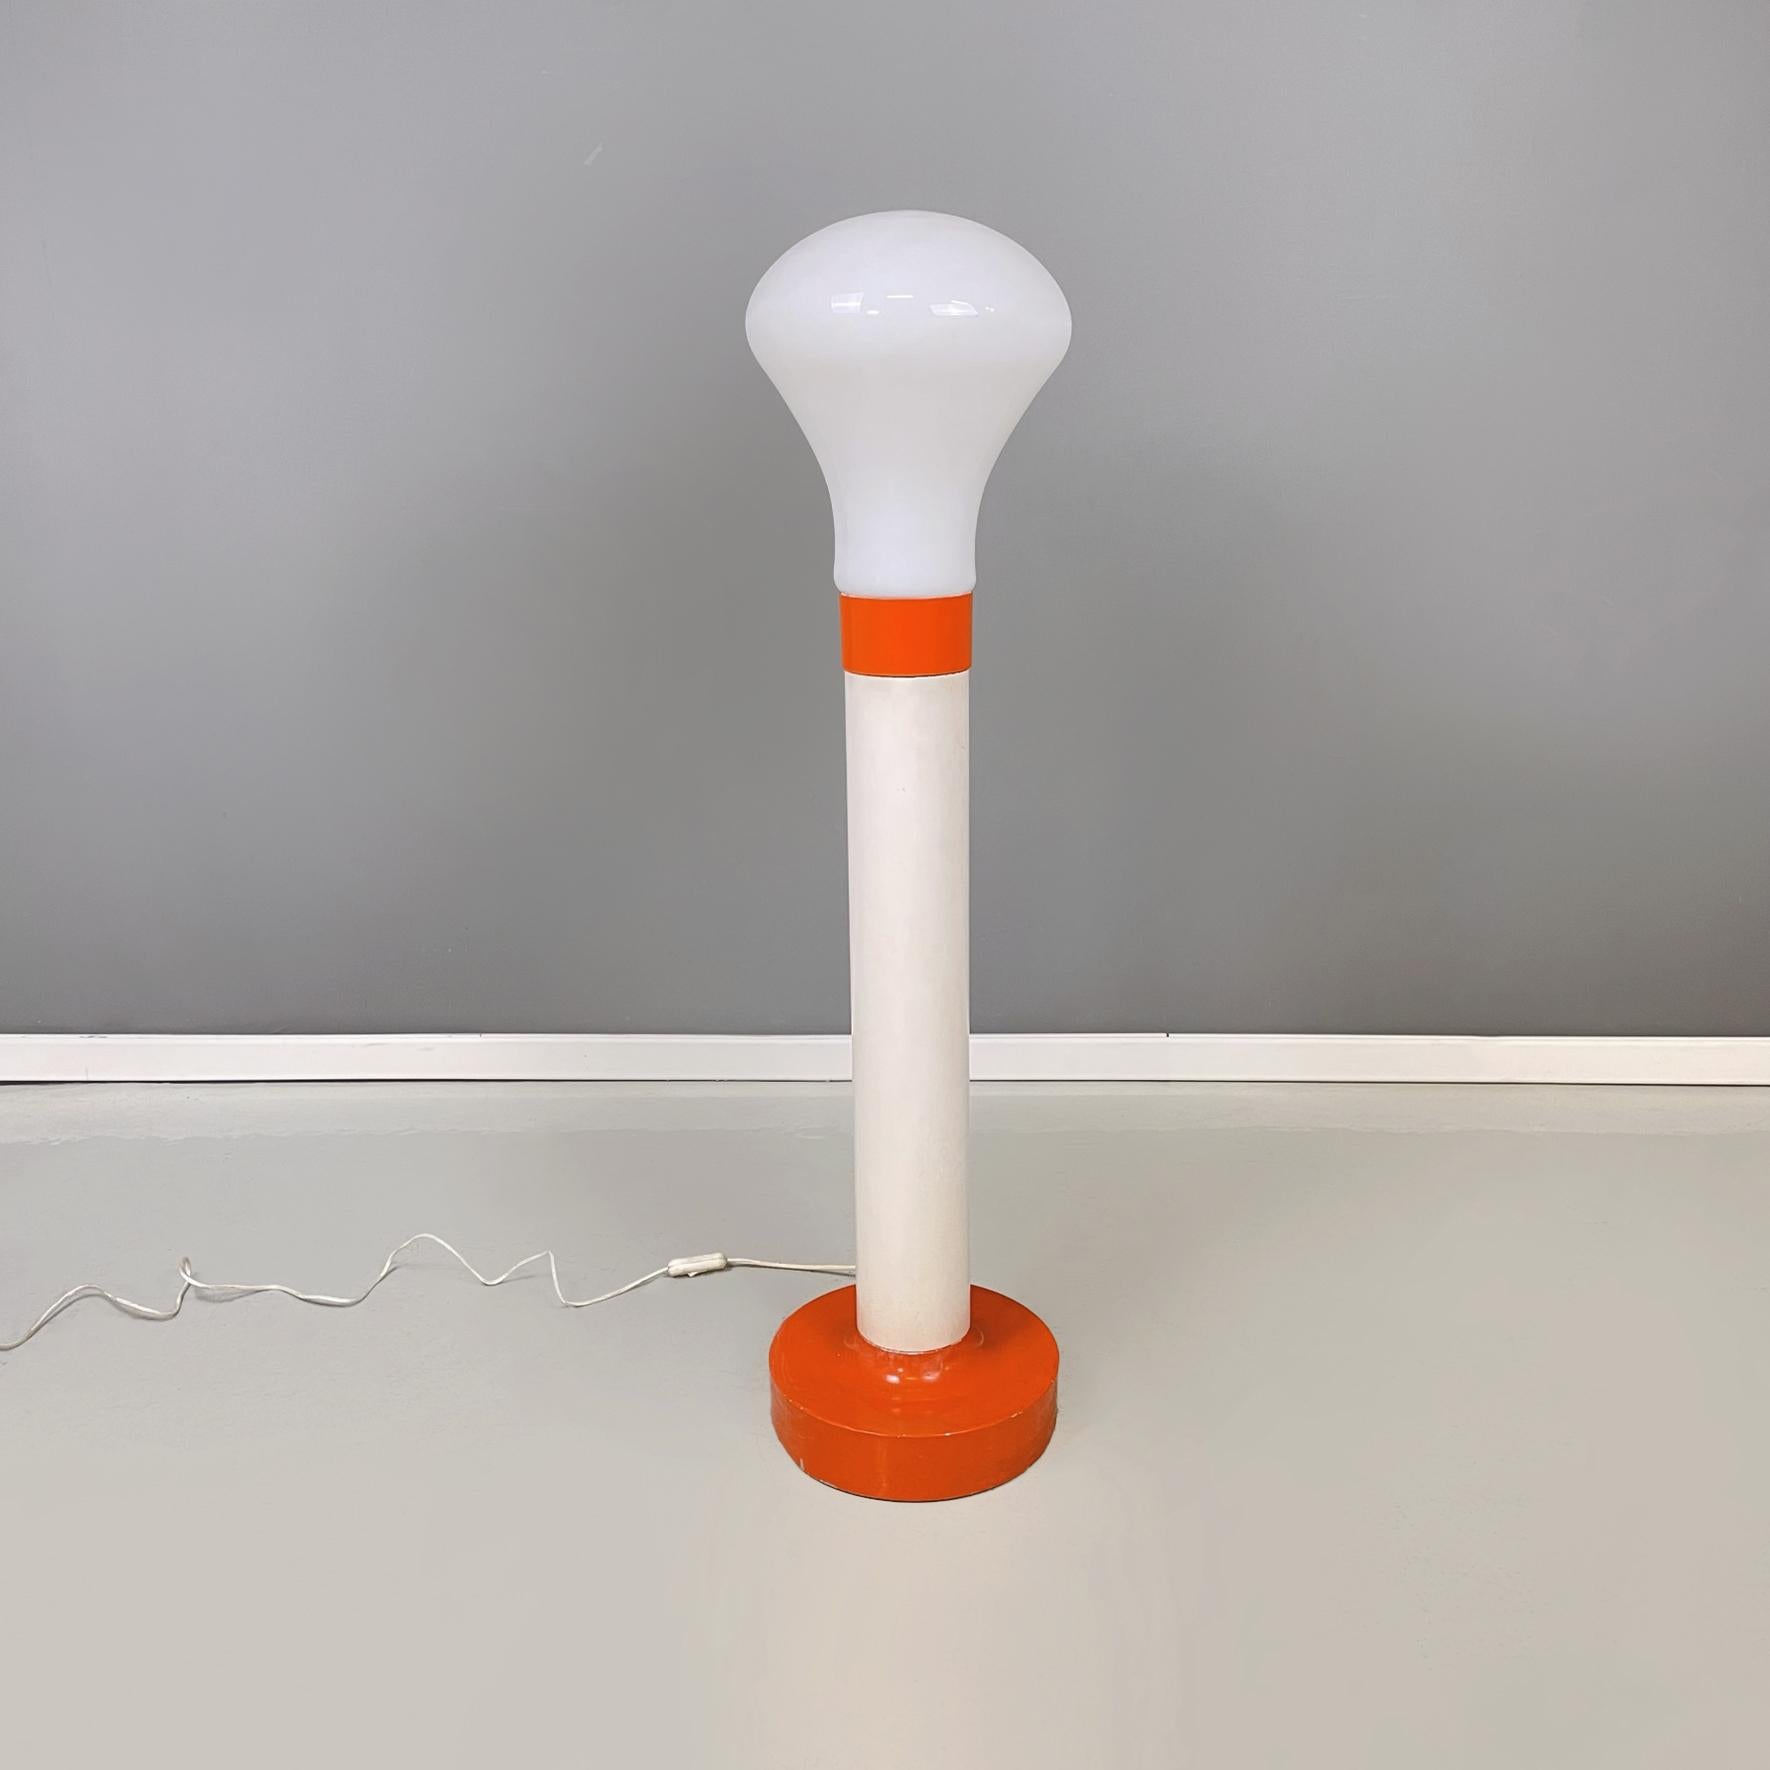 Italian space age Floor lamp in orange and white metal with opaline glass, 1970s
Floor lamp with rounded opaline glass diffuser. The central structure is in tubular metal painted white and orange. The round base is in orange painted